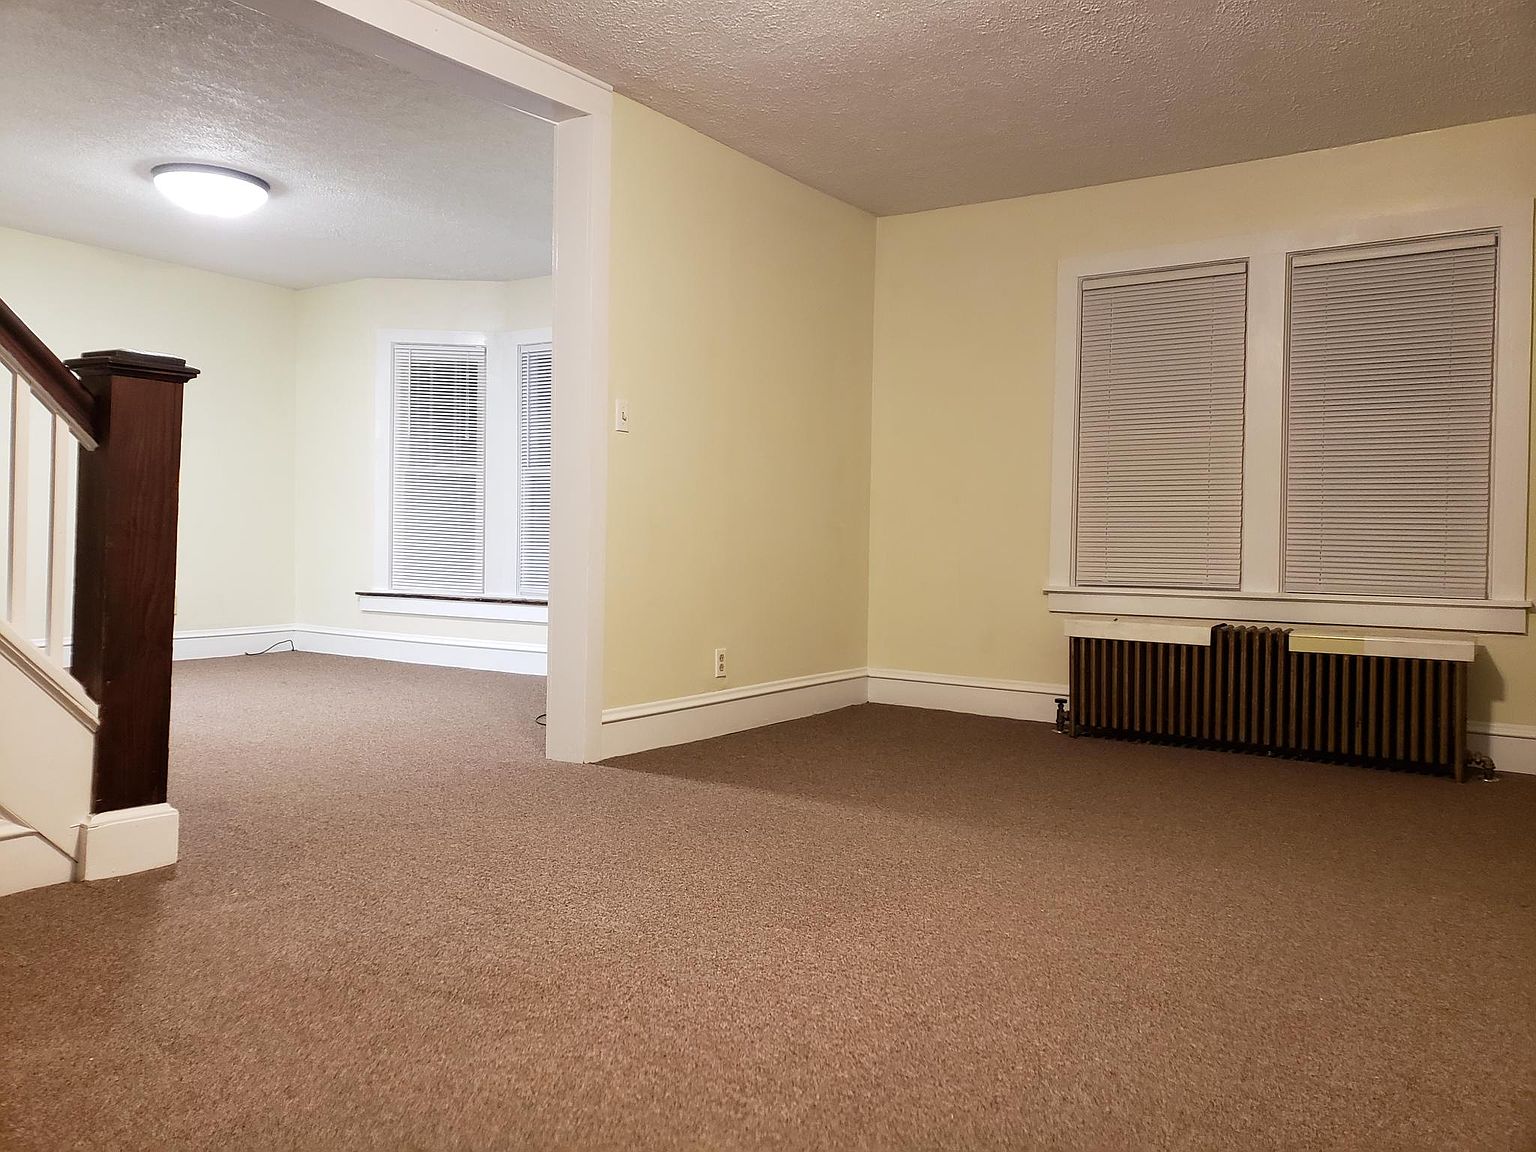 215 Glaser St #1, Sayre, PA 18840 | Zillow